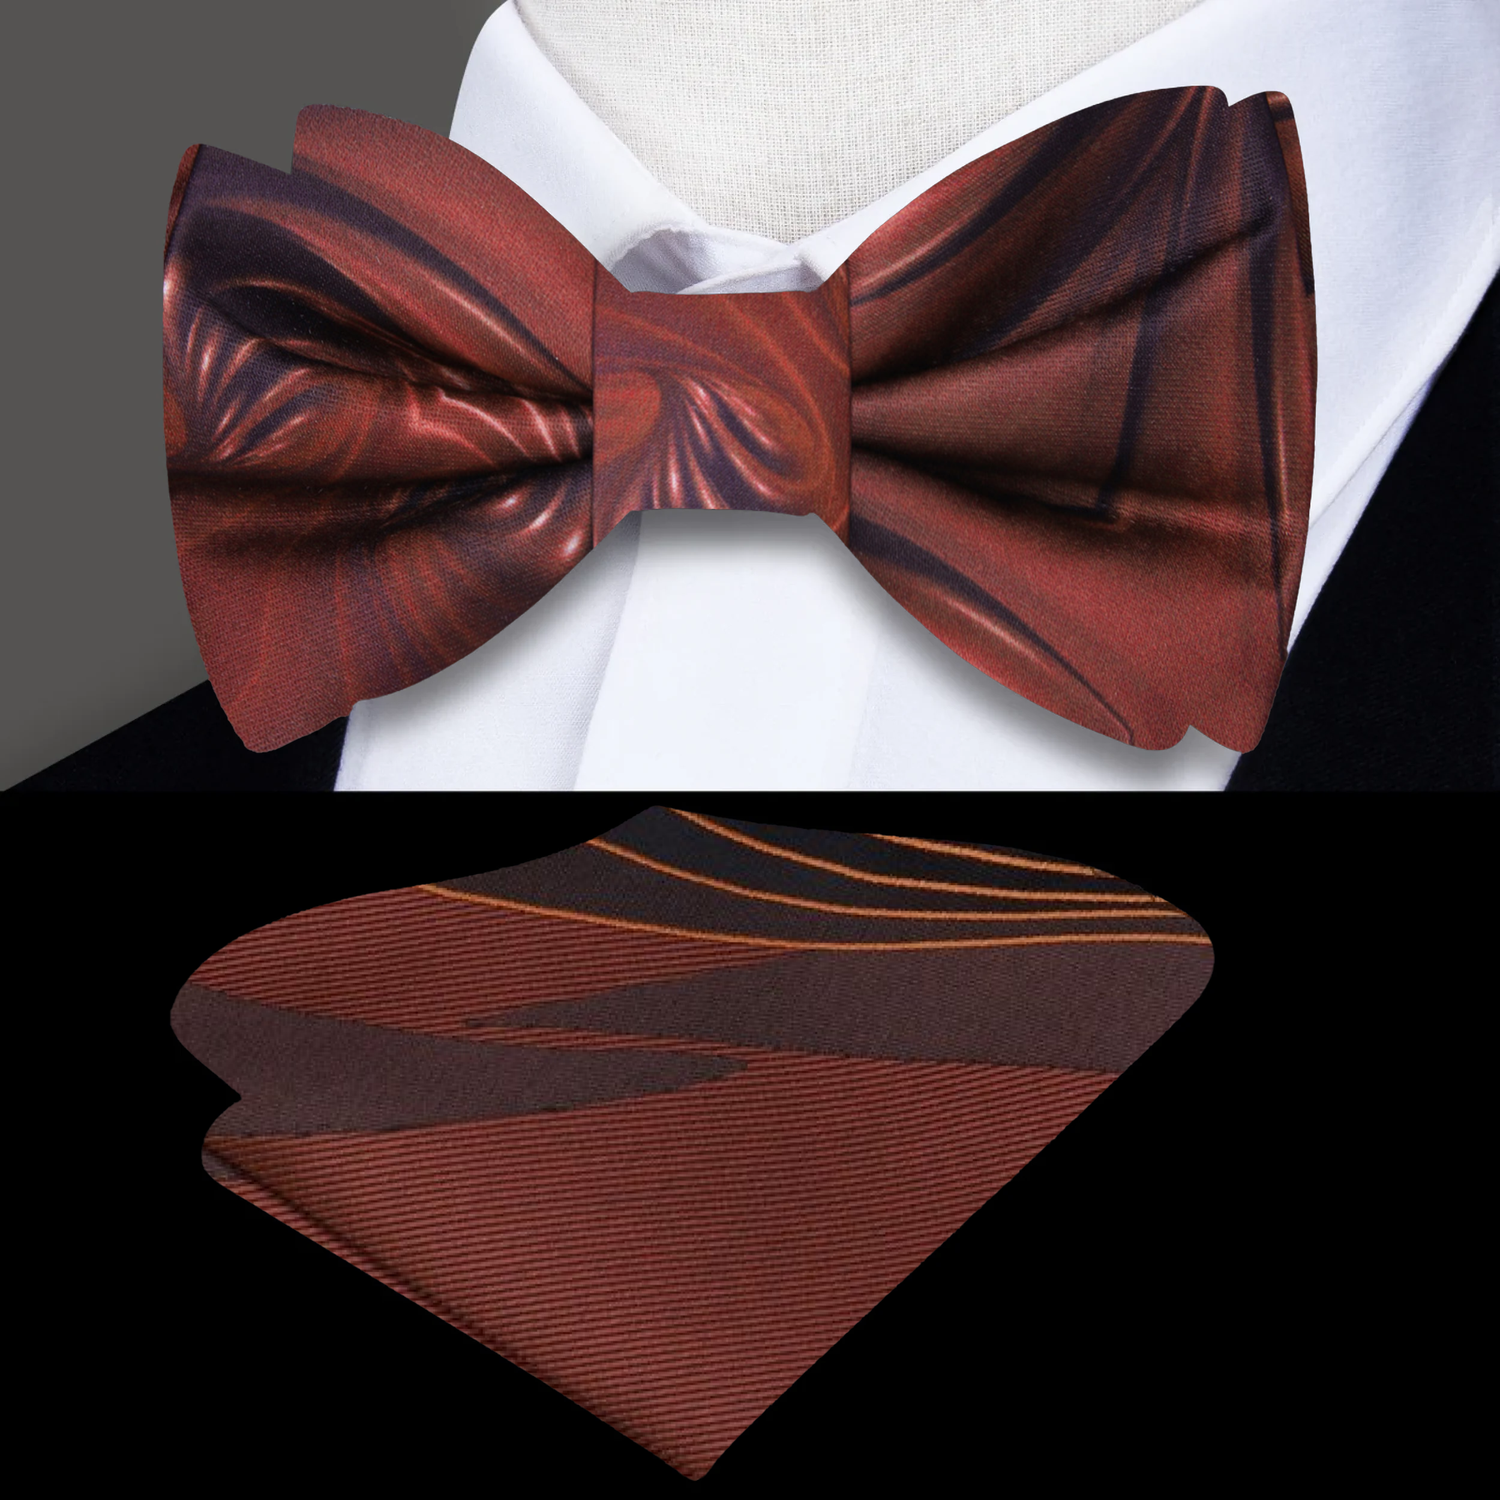 Shades of Brown Swirling Chocolate Bow Tie and Accenting Square